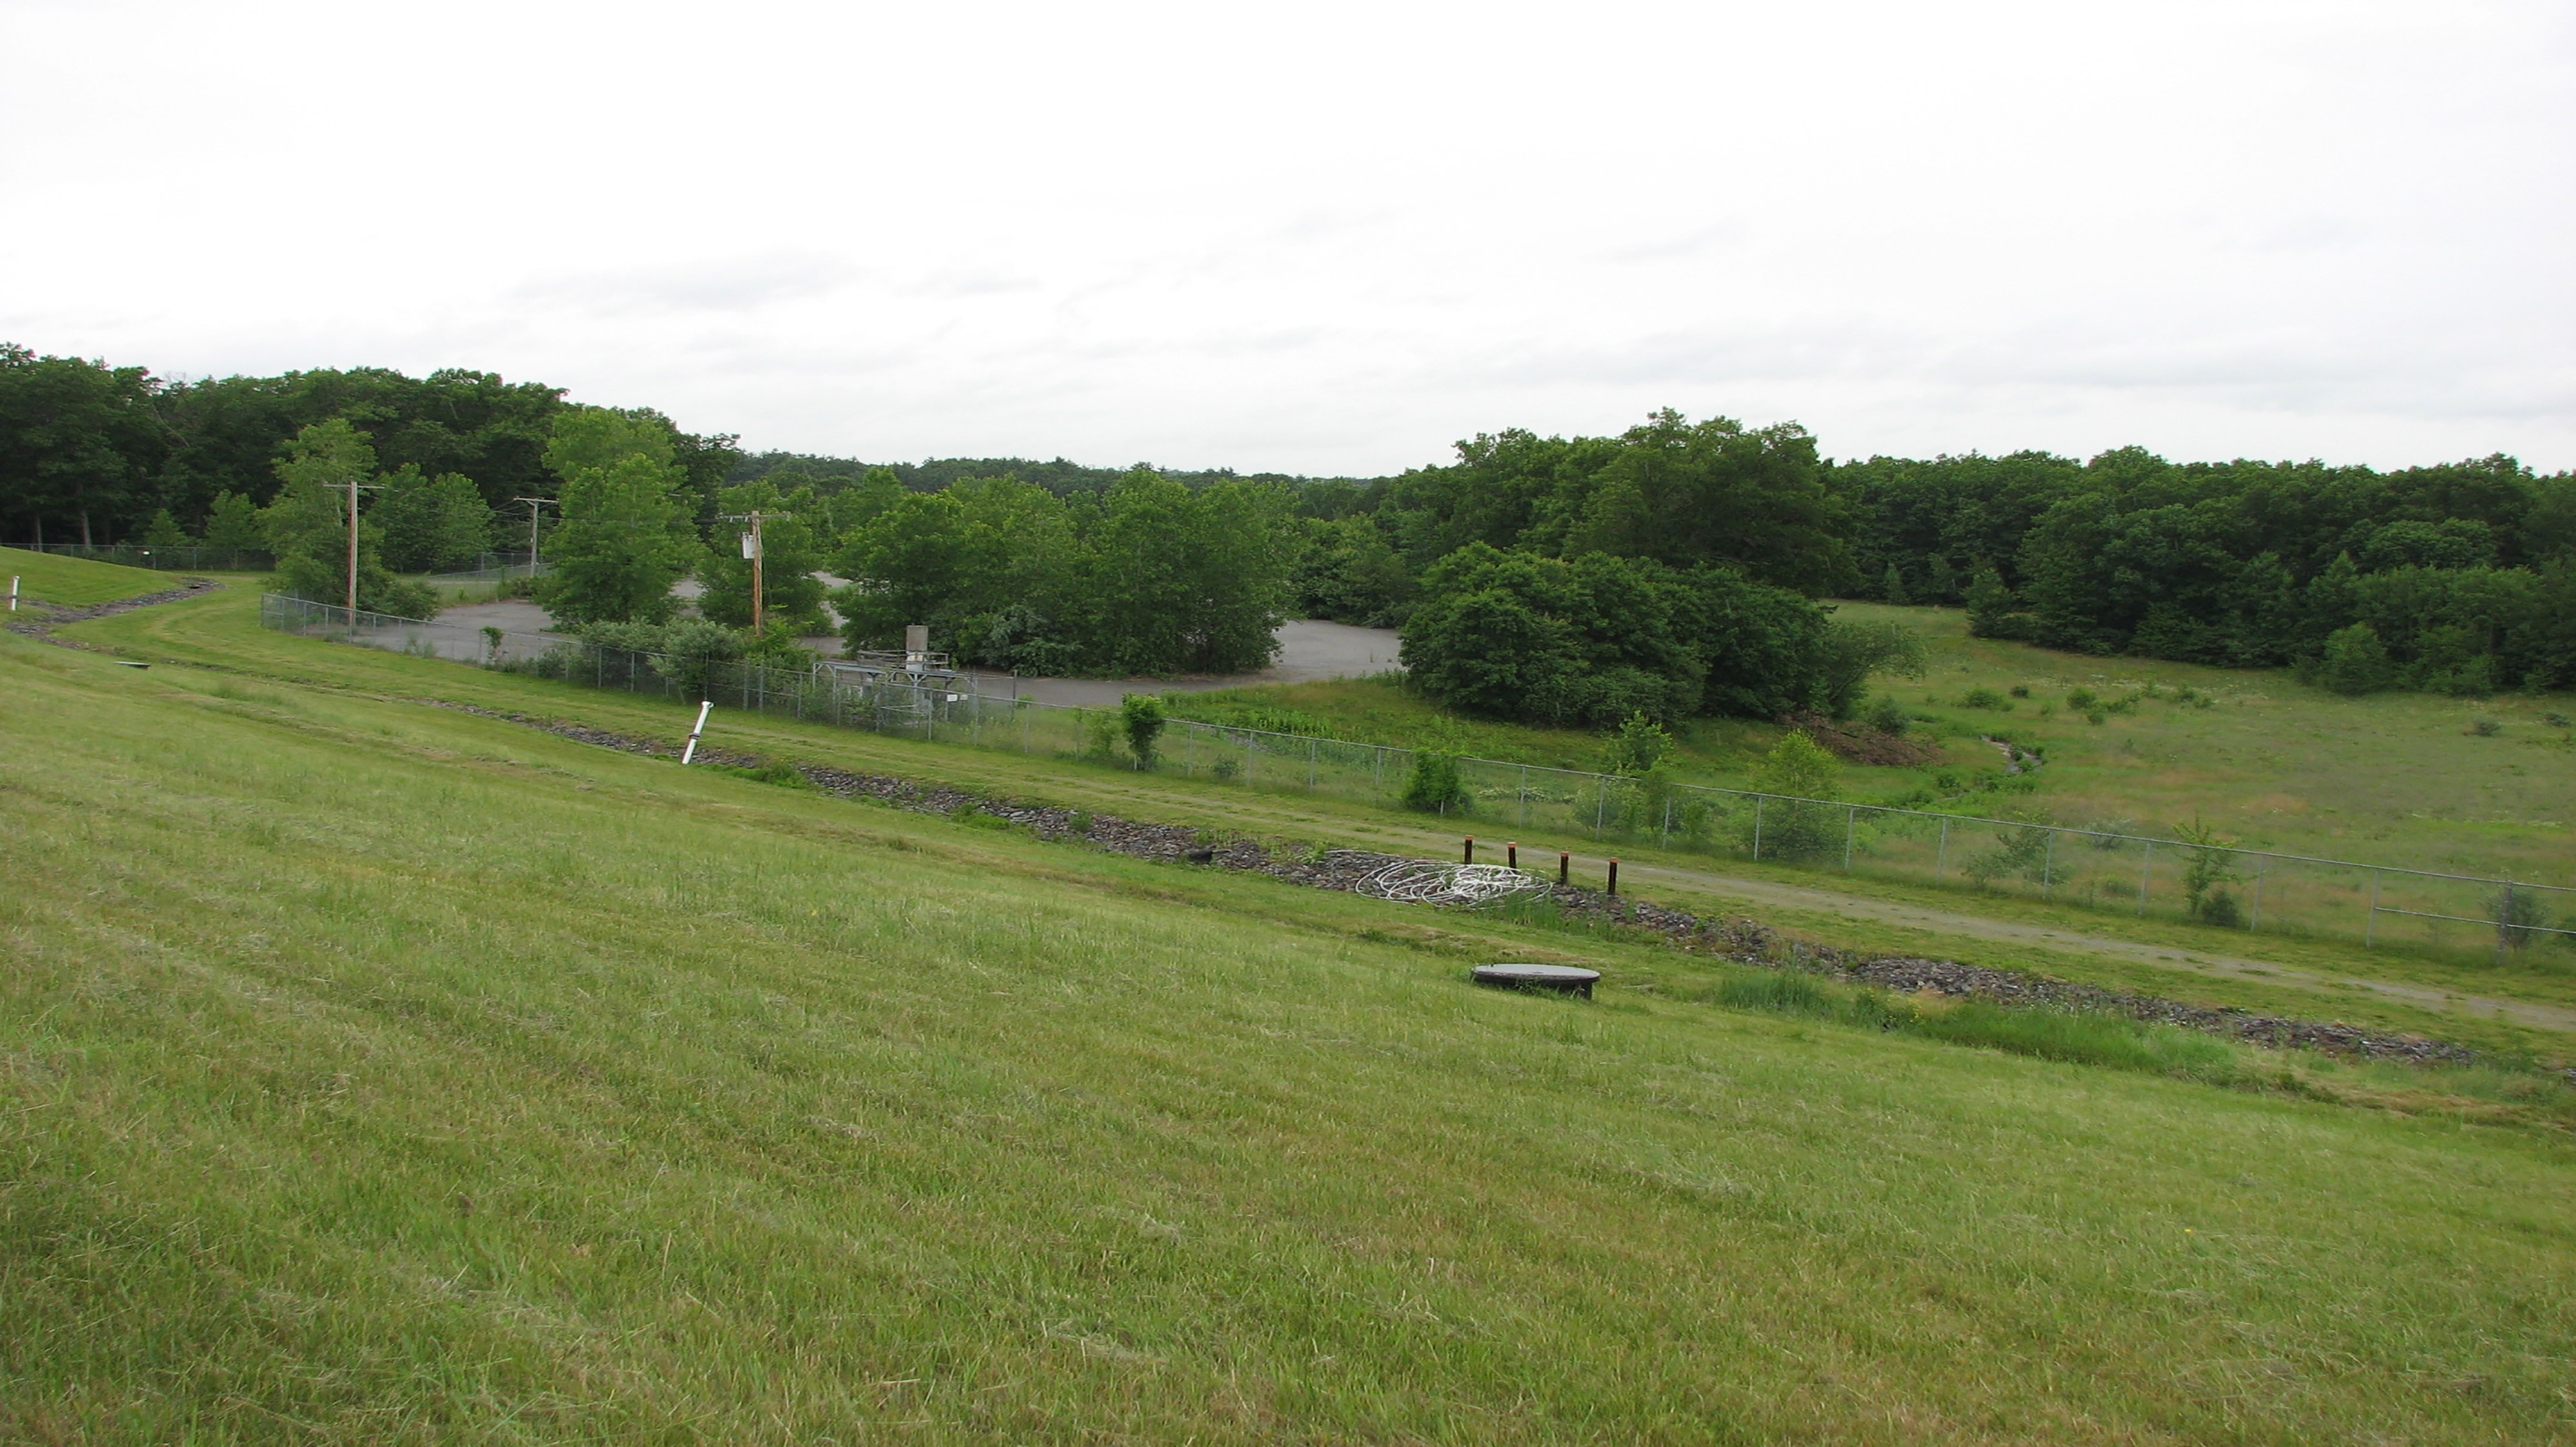 Vacant land at the site before redevelopment